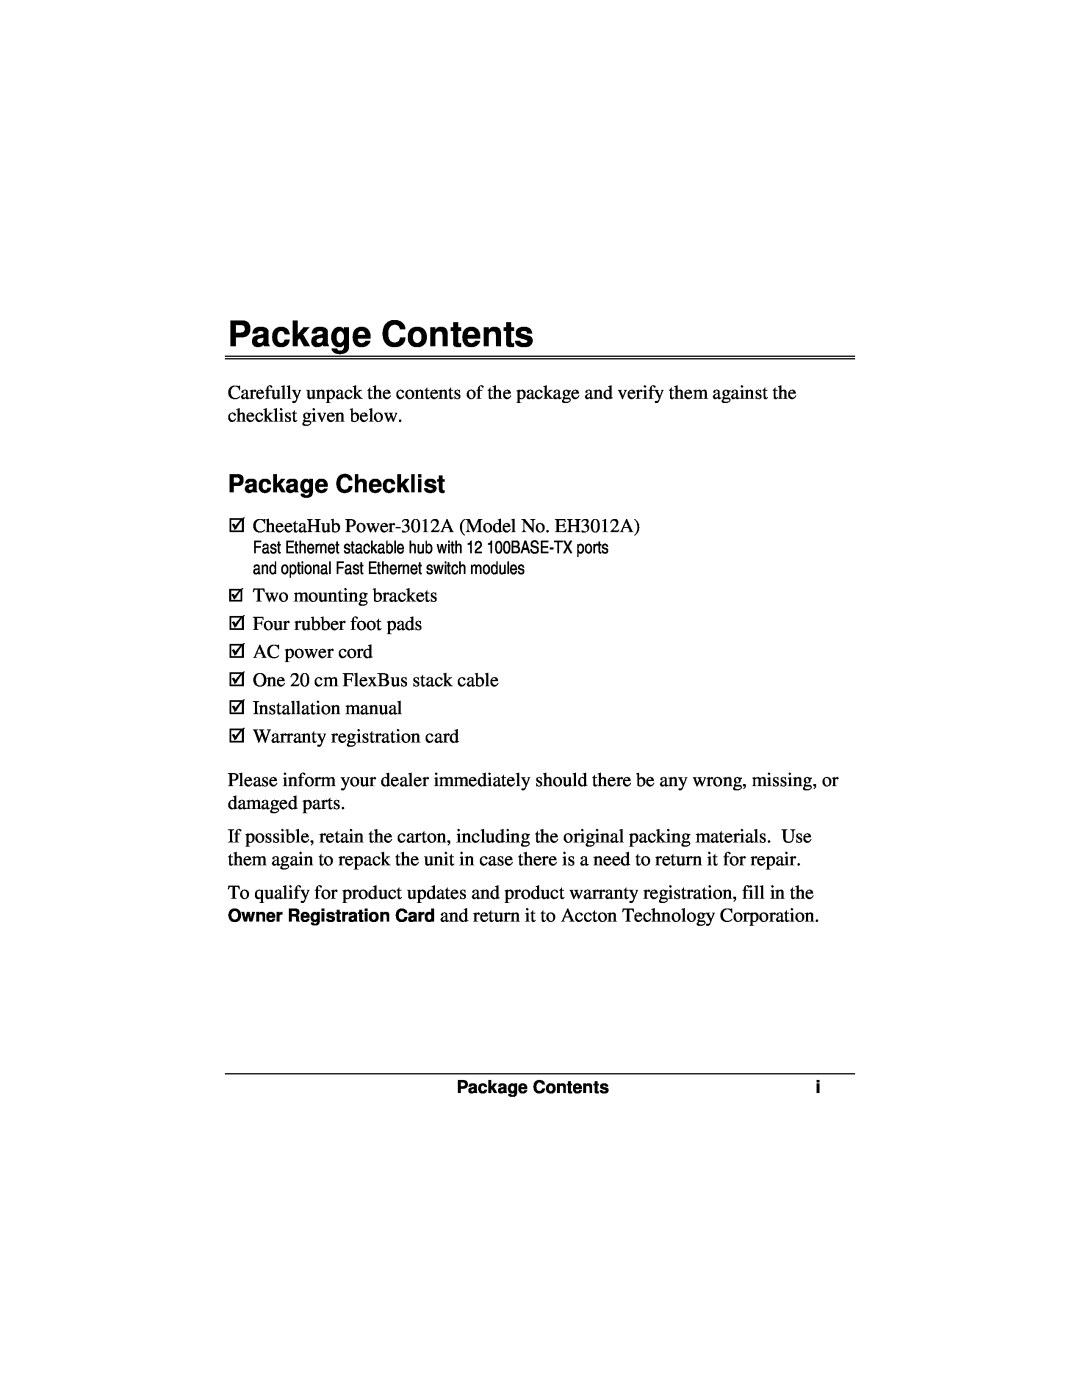 Accton Technology POWER-3012A manual Package Contents, Package Checklist 